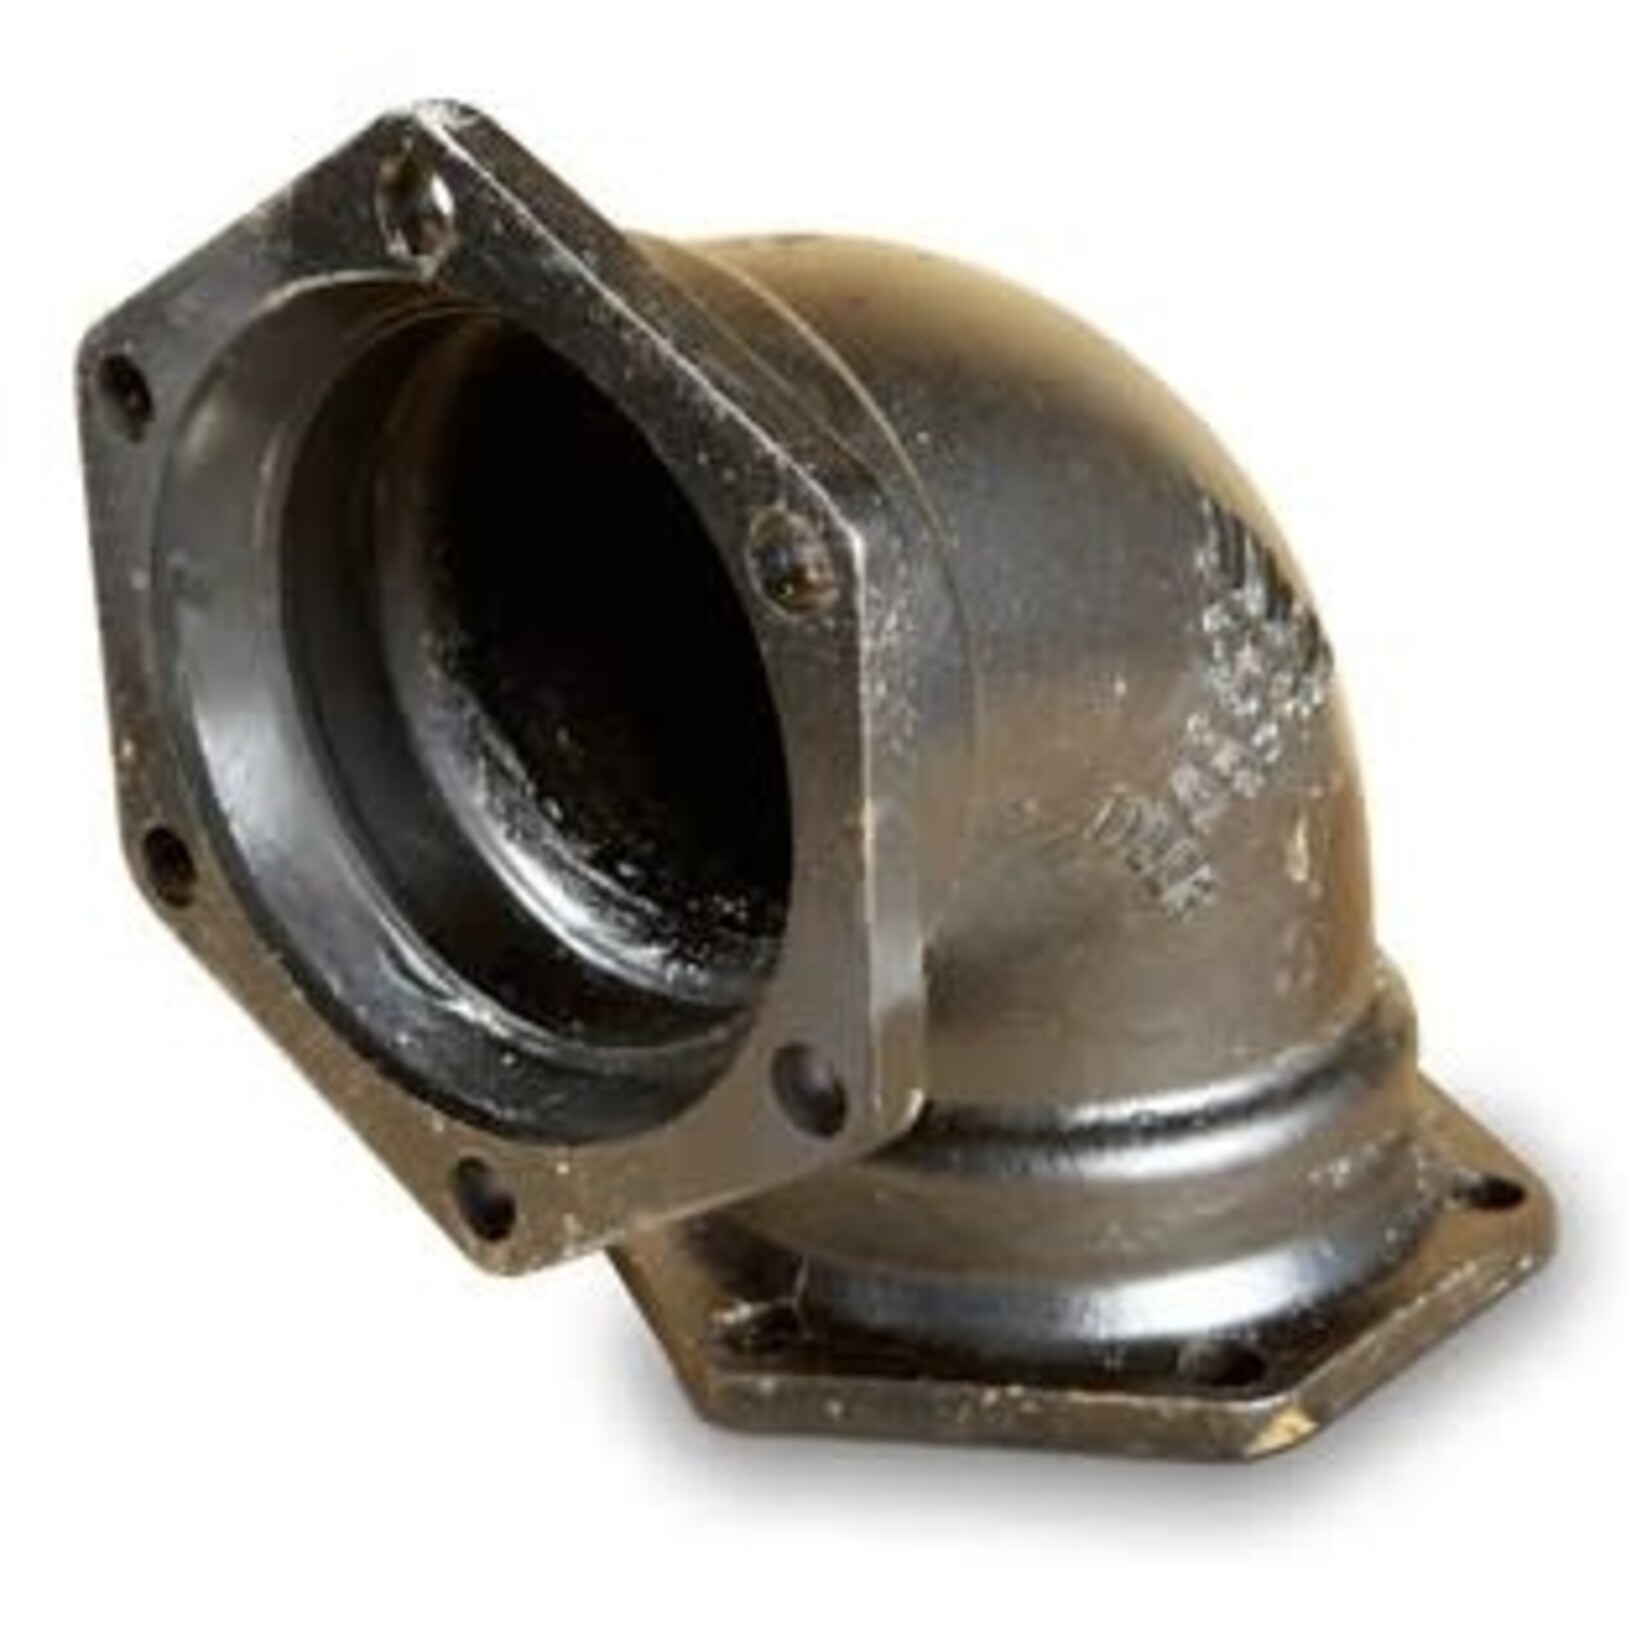 TYLER UNION 6 IN DUCTILE IRON 90 DEGREE ELBOW